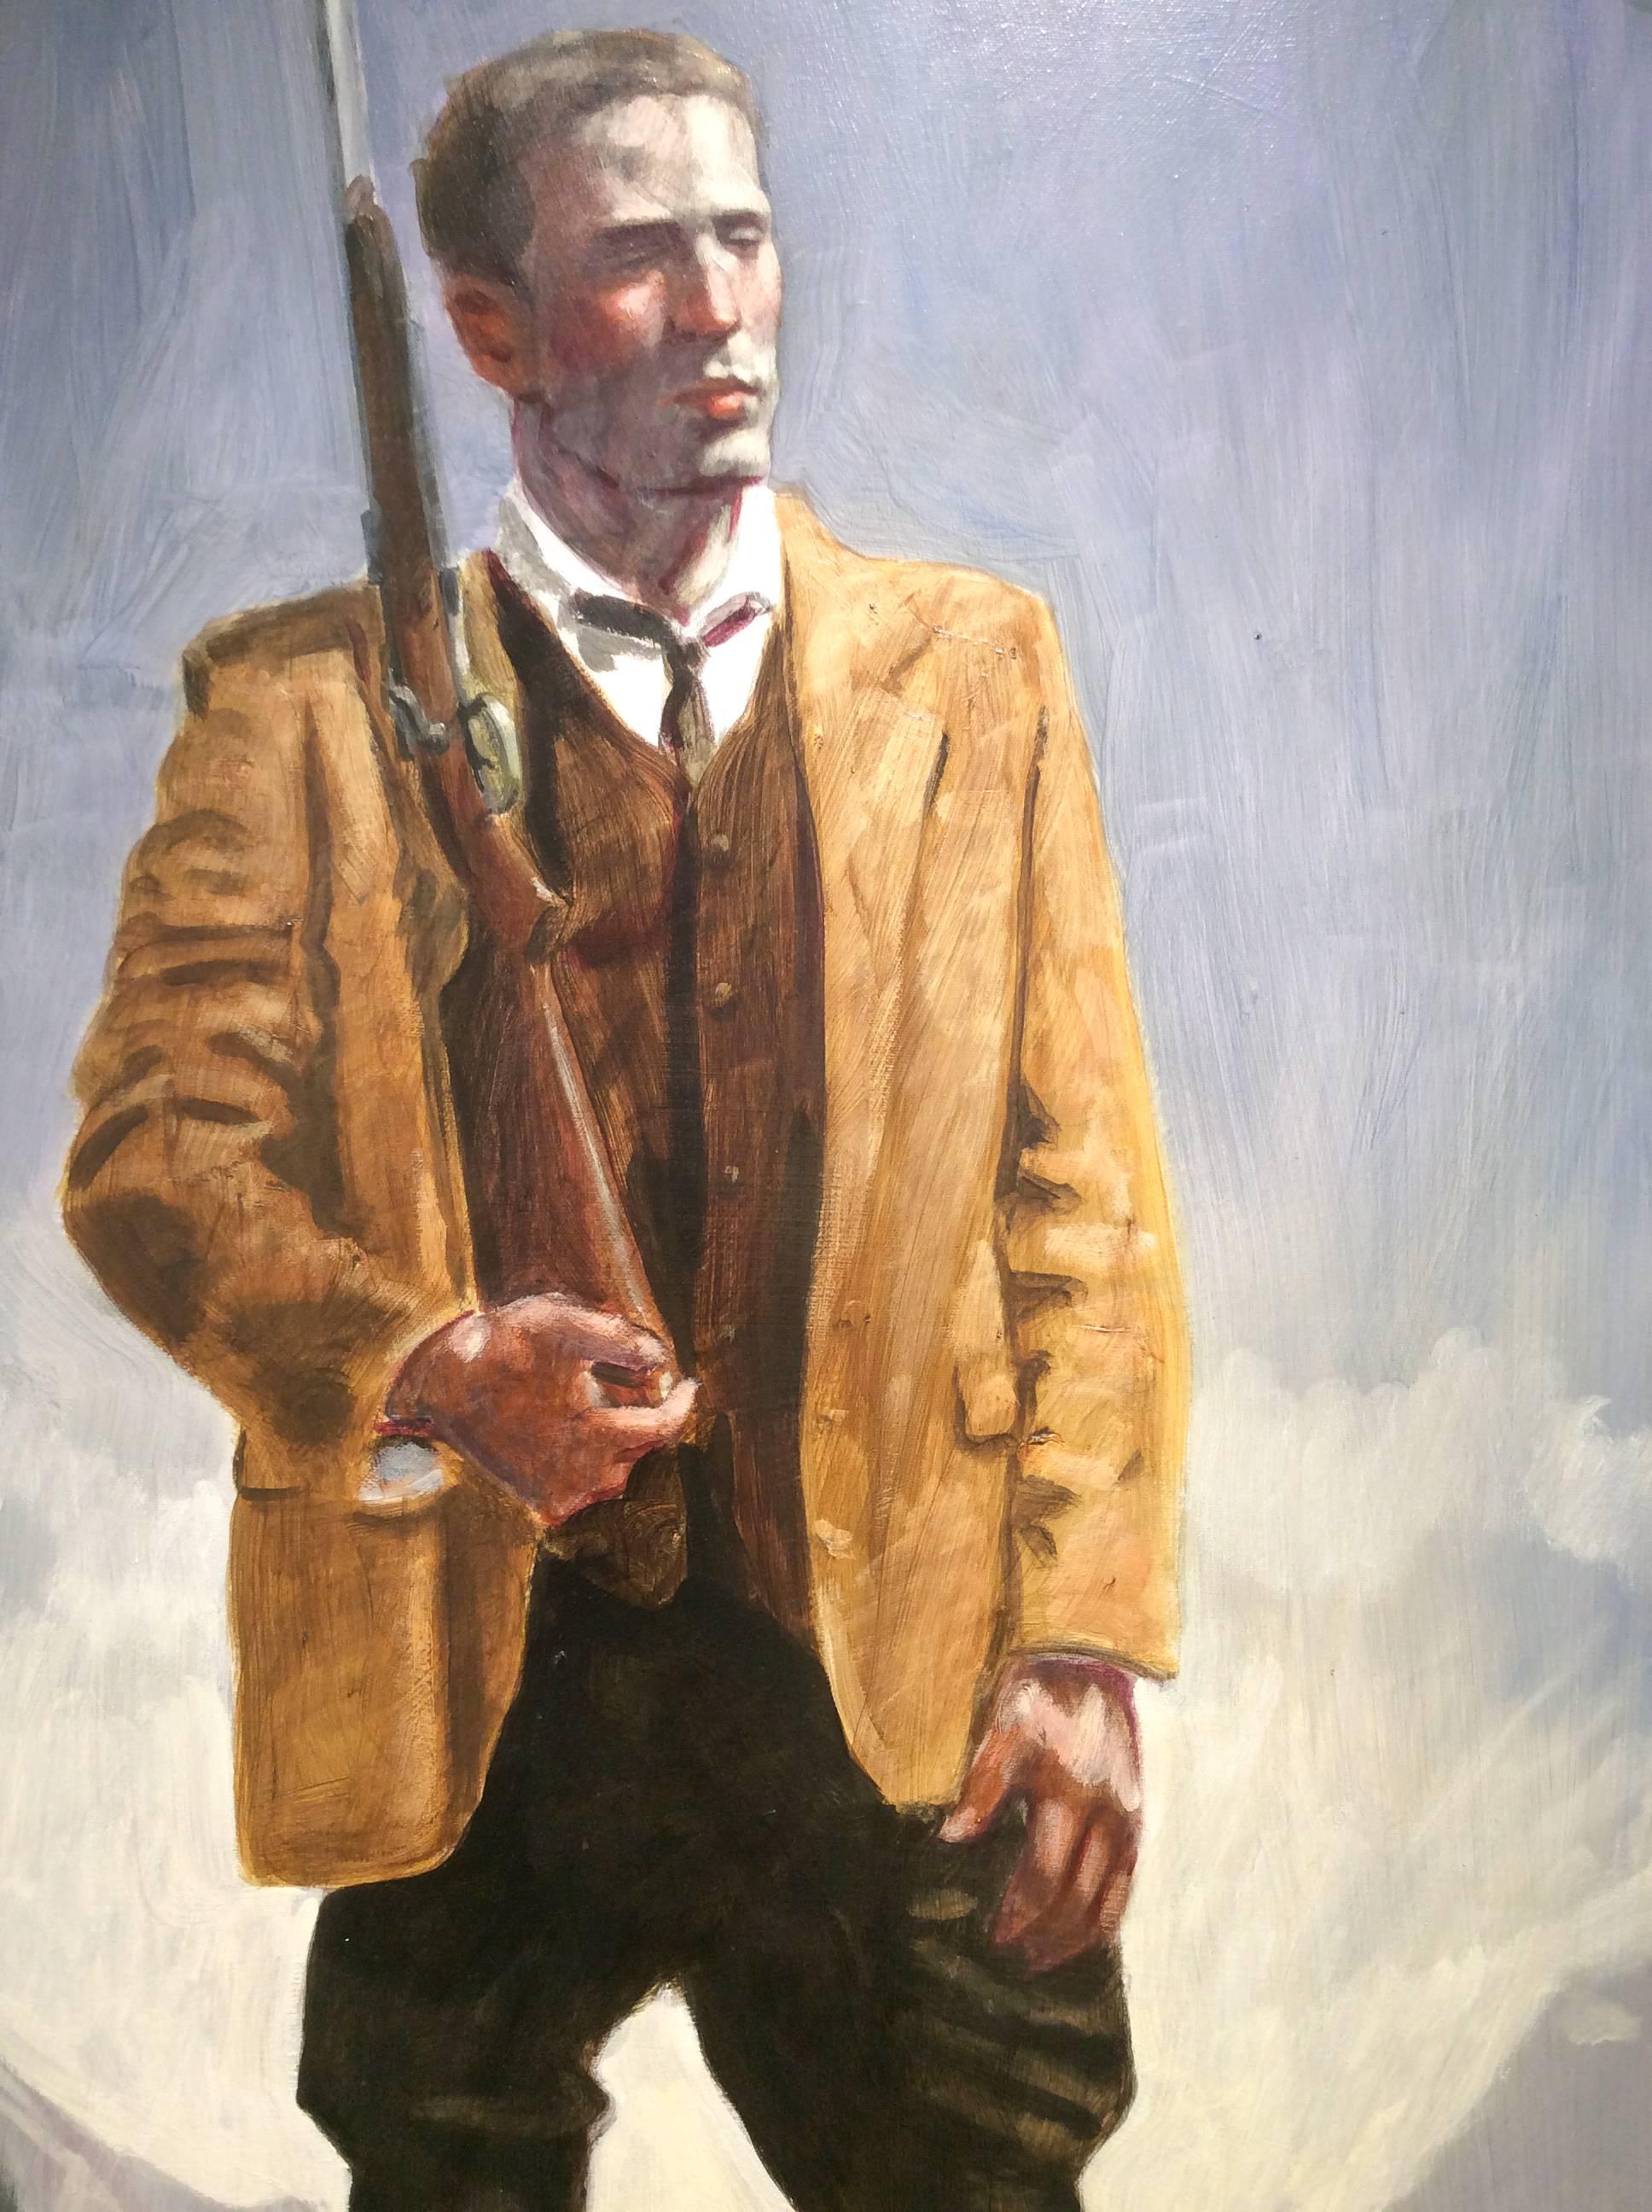 Vertical figurative oil painting of athletic male hunter in mountainous landscape
47.5 x 24 inches unframed
Signed, verso & front (Mark Beard, aka. Bruce Sargeant)
This work is available from Carrie Haddad Gallery, based in Hudson, NY.

This